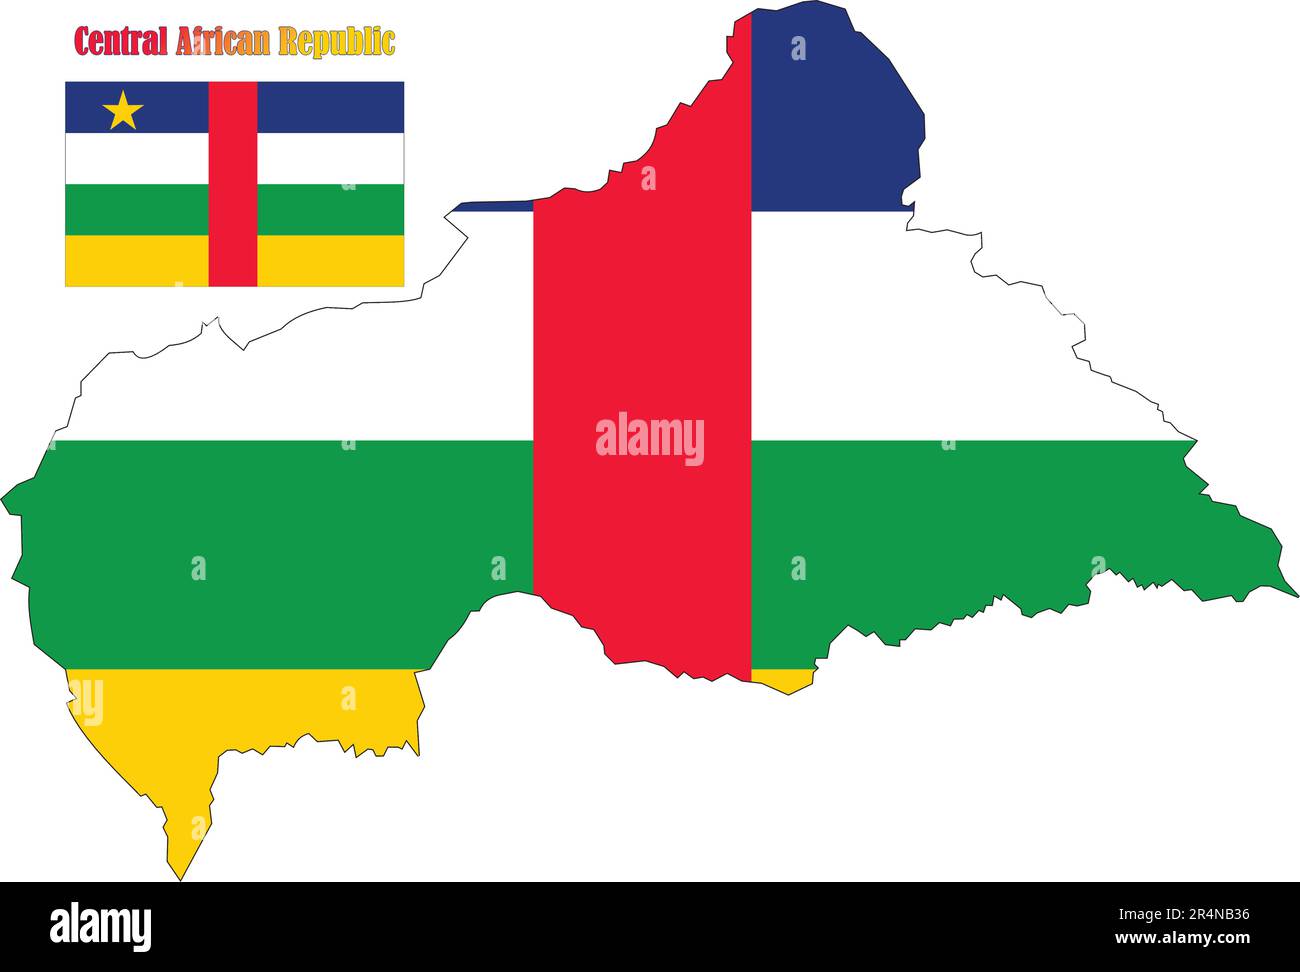 Central African Republic Map and Flag Stock Vector